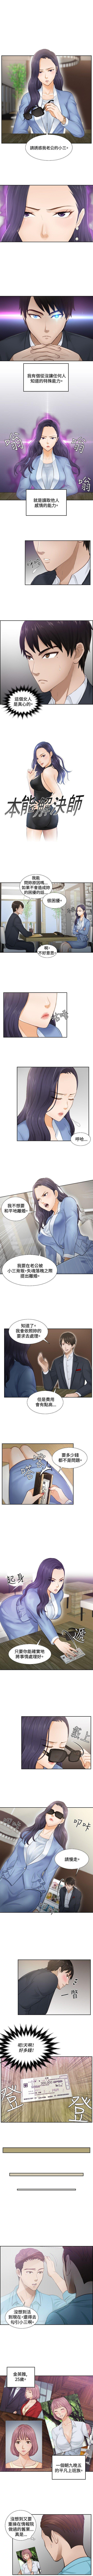 High Heels 本能解決師 1-51 Jeans - Page 5